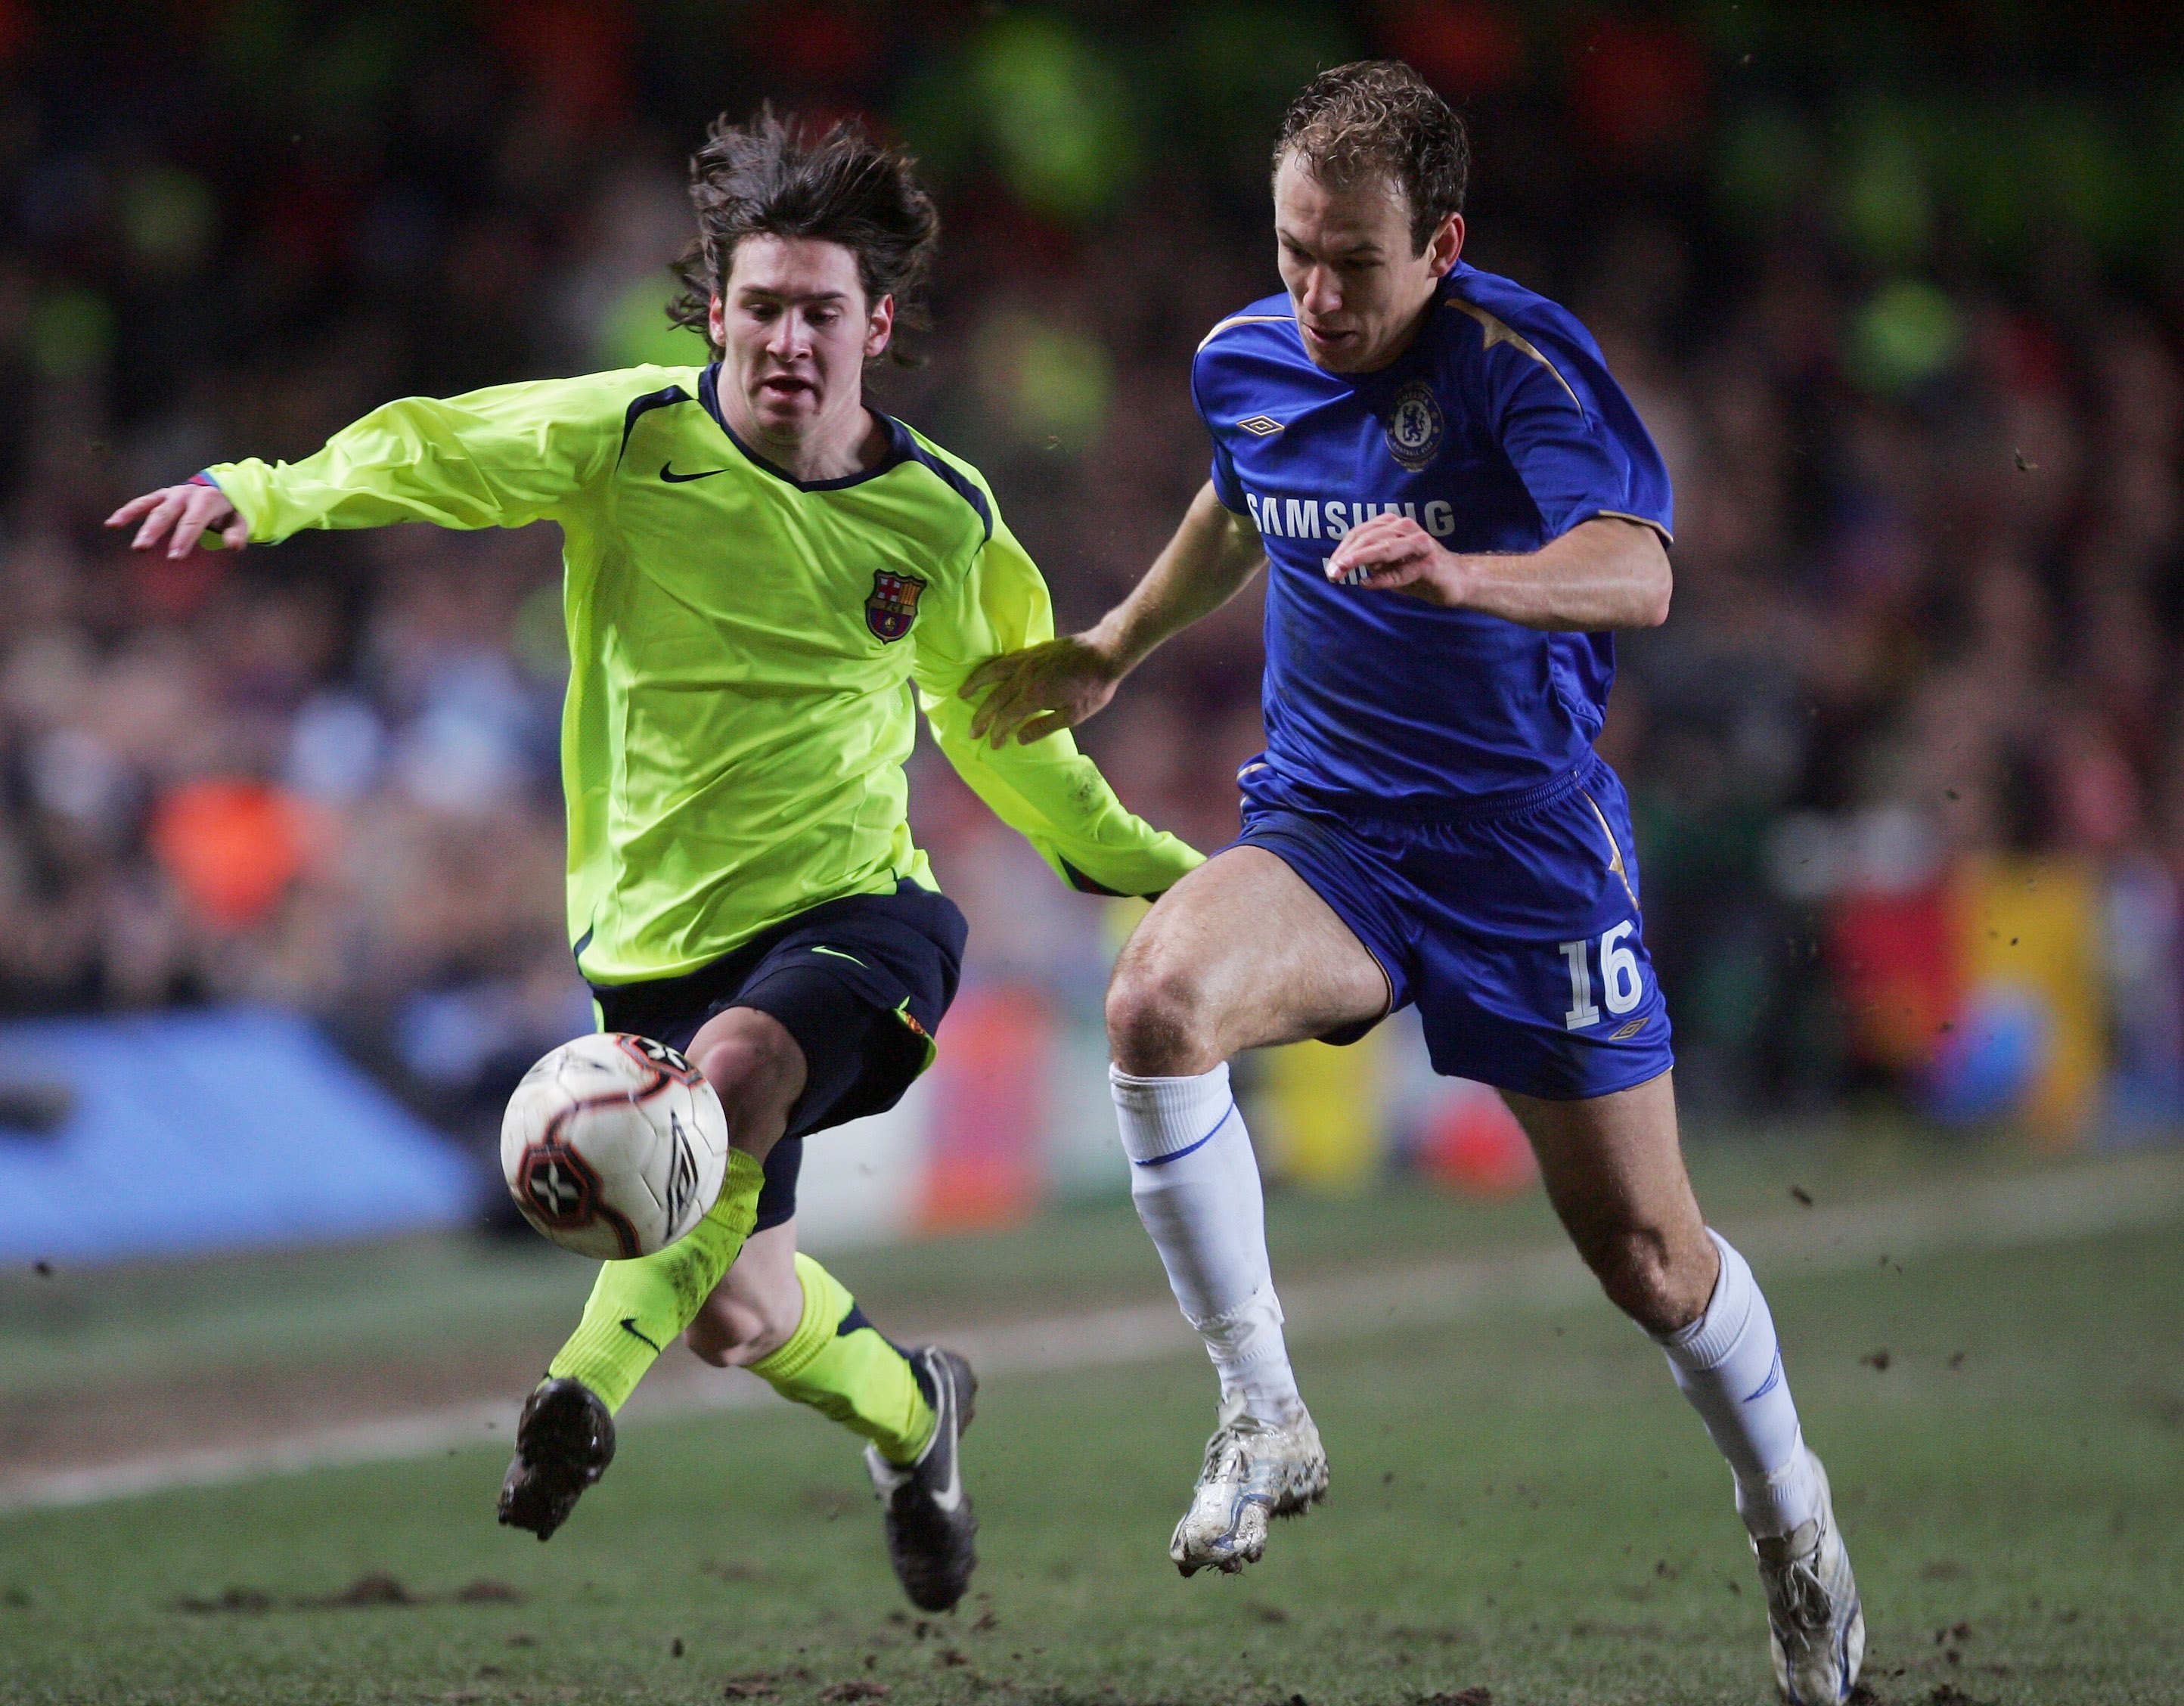 LONDON - FEBRUARY 22:  Lionel Messi of Barcelonabattles with Arjen Robben of Chelsea during the UEFA Champions League Round of 16, First Leg match between Chelsea and Barcelona at Stamford Bridge on February 22, 2006 in London, England.  (Photo by Mike He